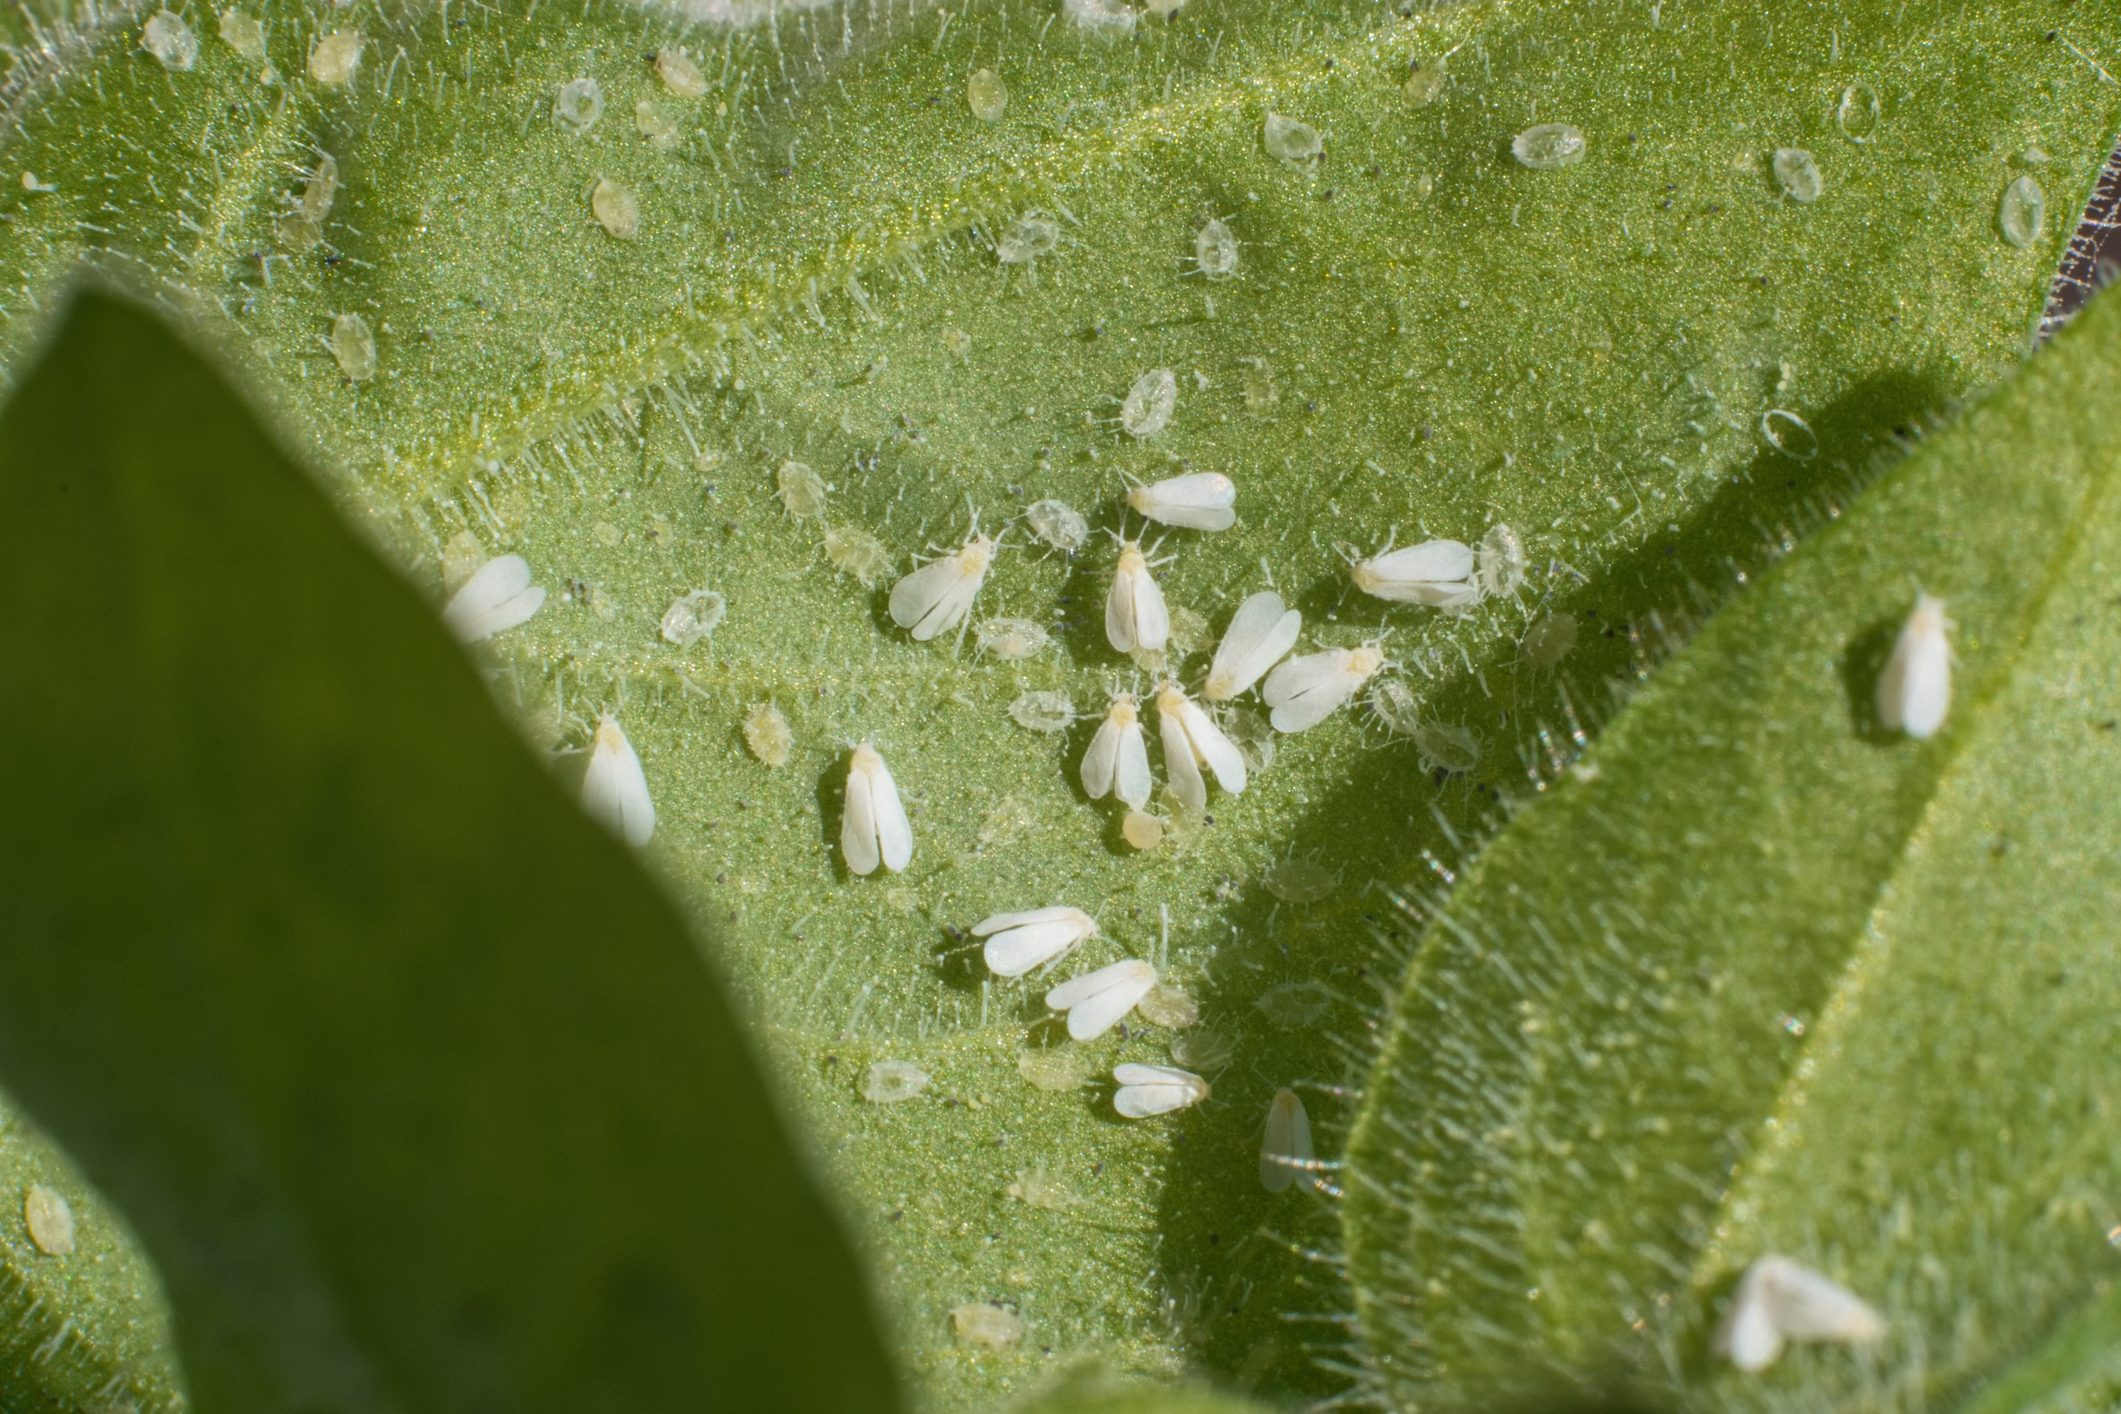 Whiteflies (Aleyrodidae) parasites colony that typically feed on the undersides of plant leaves.